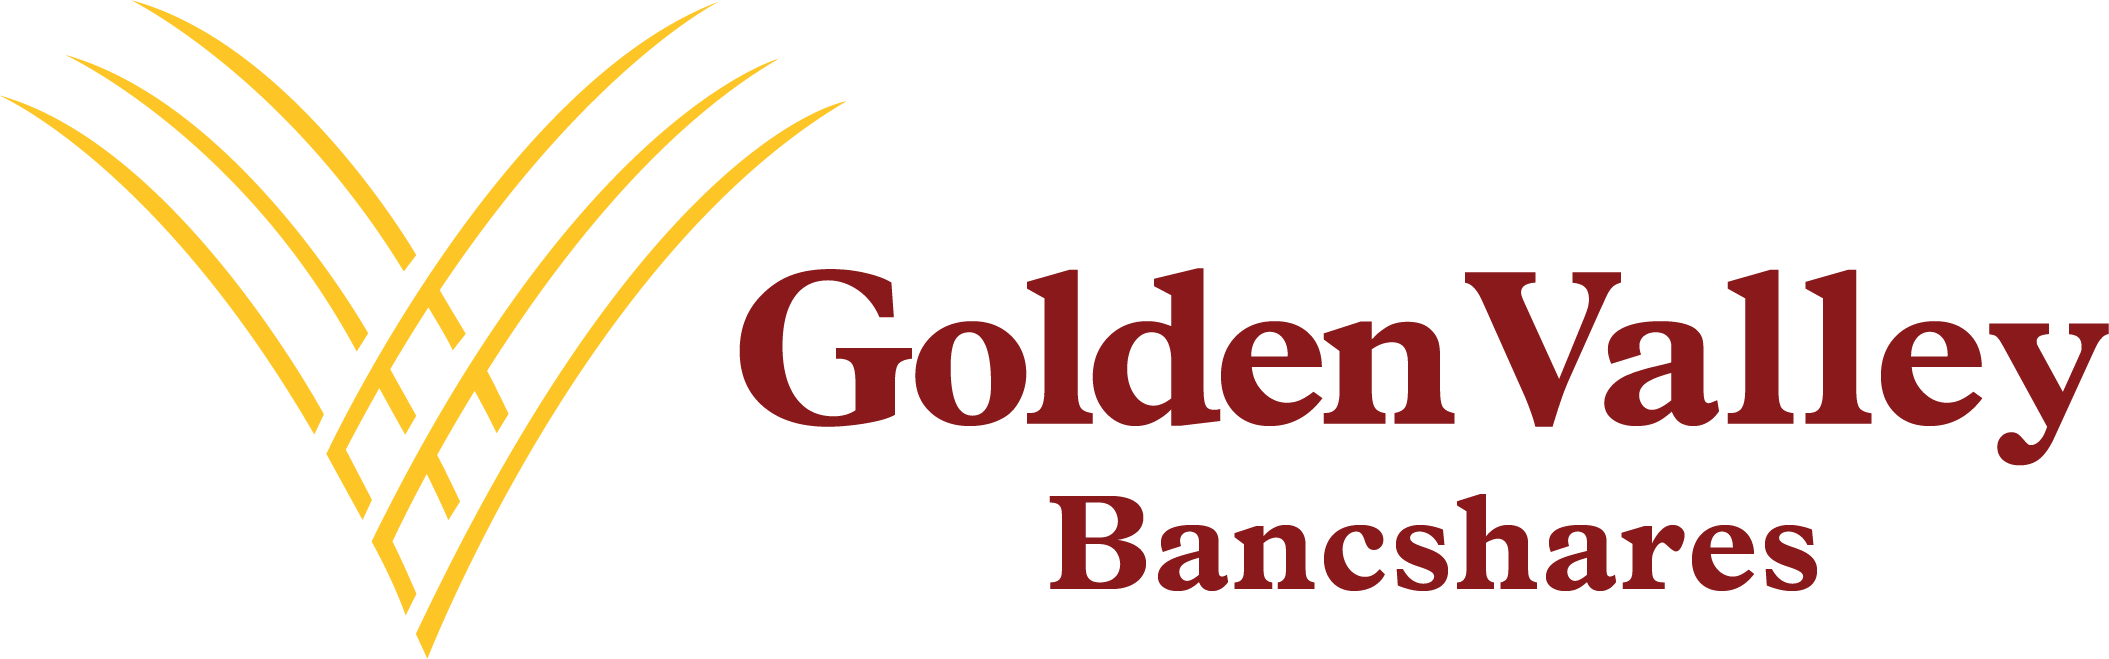 GOLDEN VY BANCSHARES INC., Monday, January 24, 2022, Press release picture